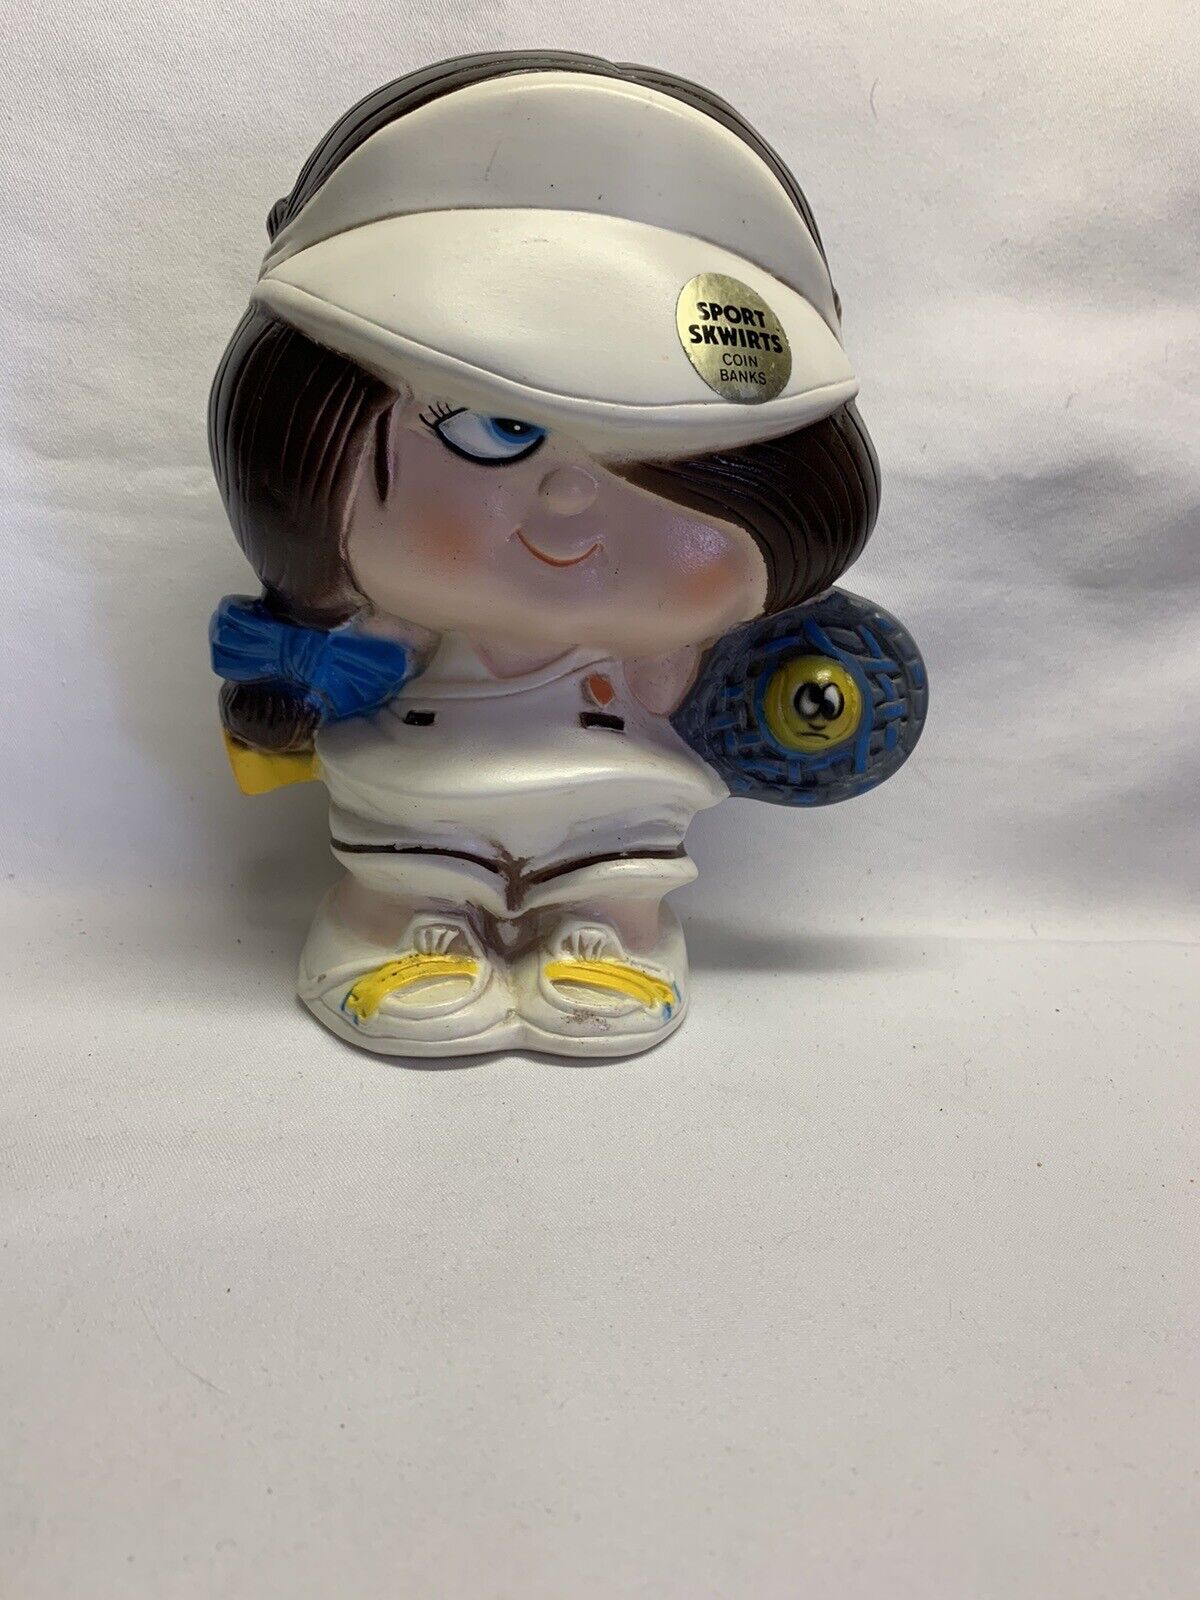 Skwirts Coin Bank 1980 Sally Serve 8 Inches Tall And 6 Inches Wide